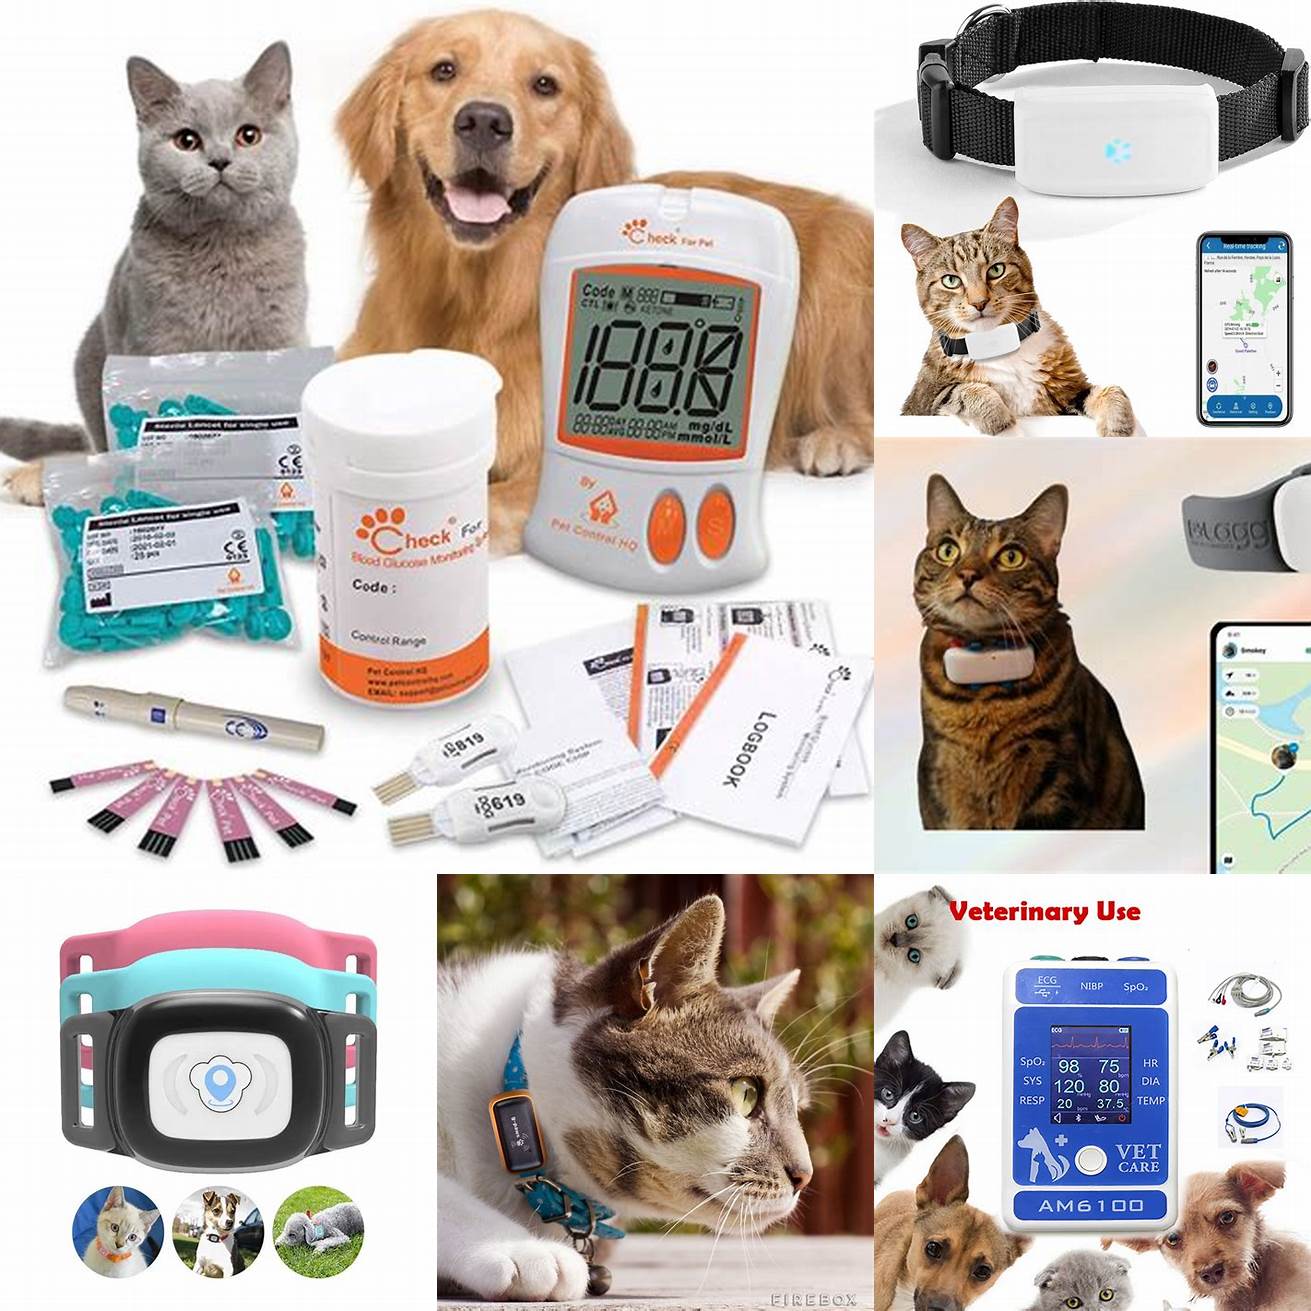 Pet monitoring systems